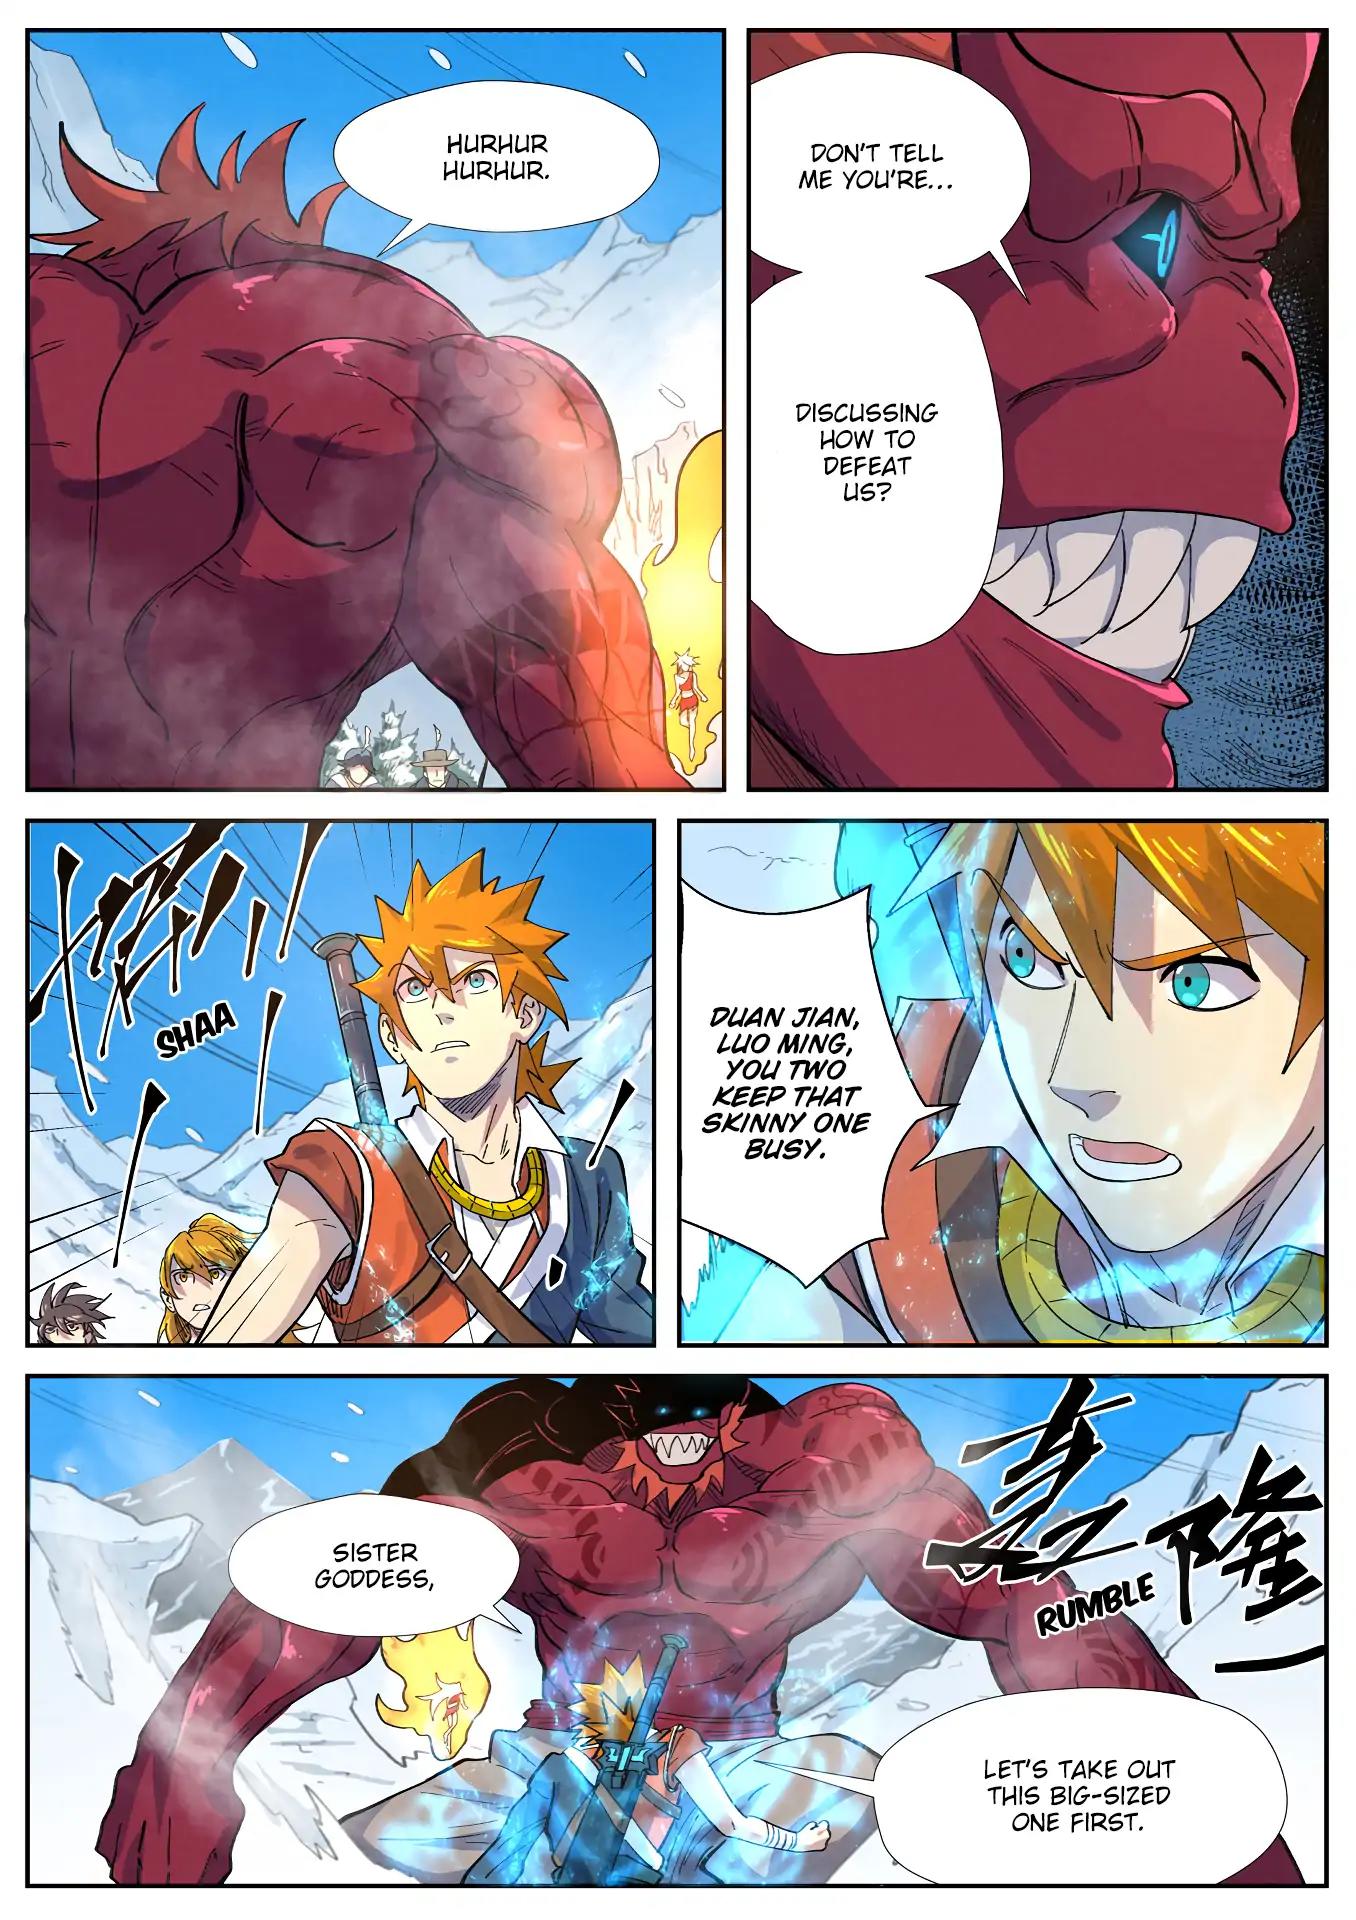 Tales of Demons and Gods Chapter 250.2: